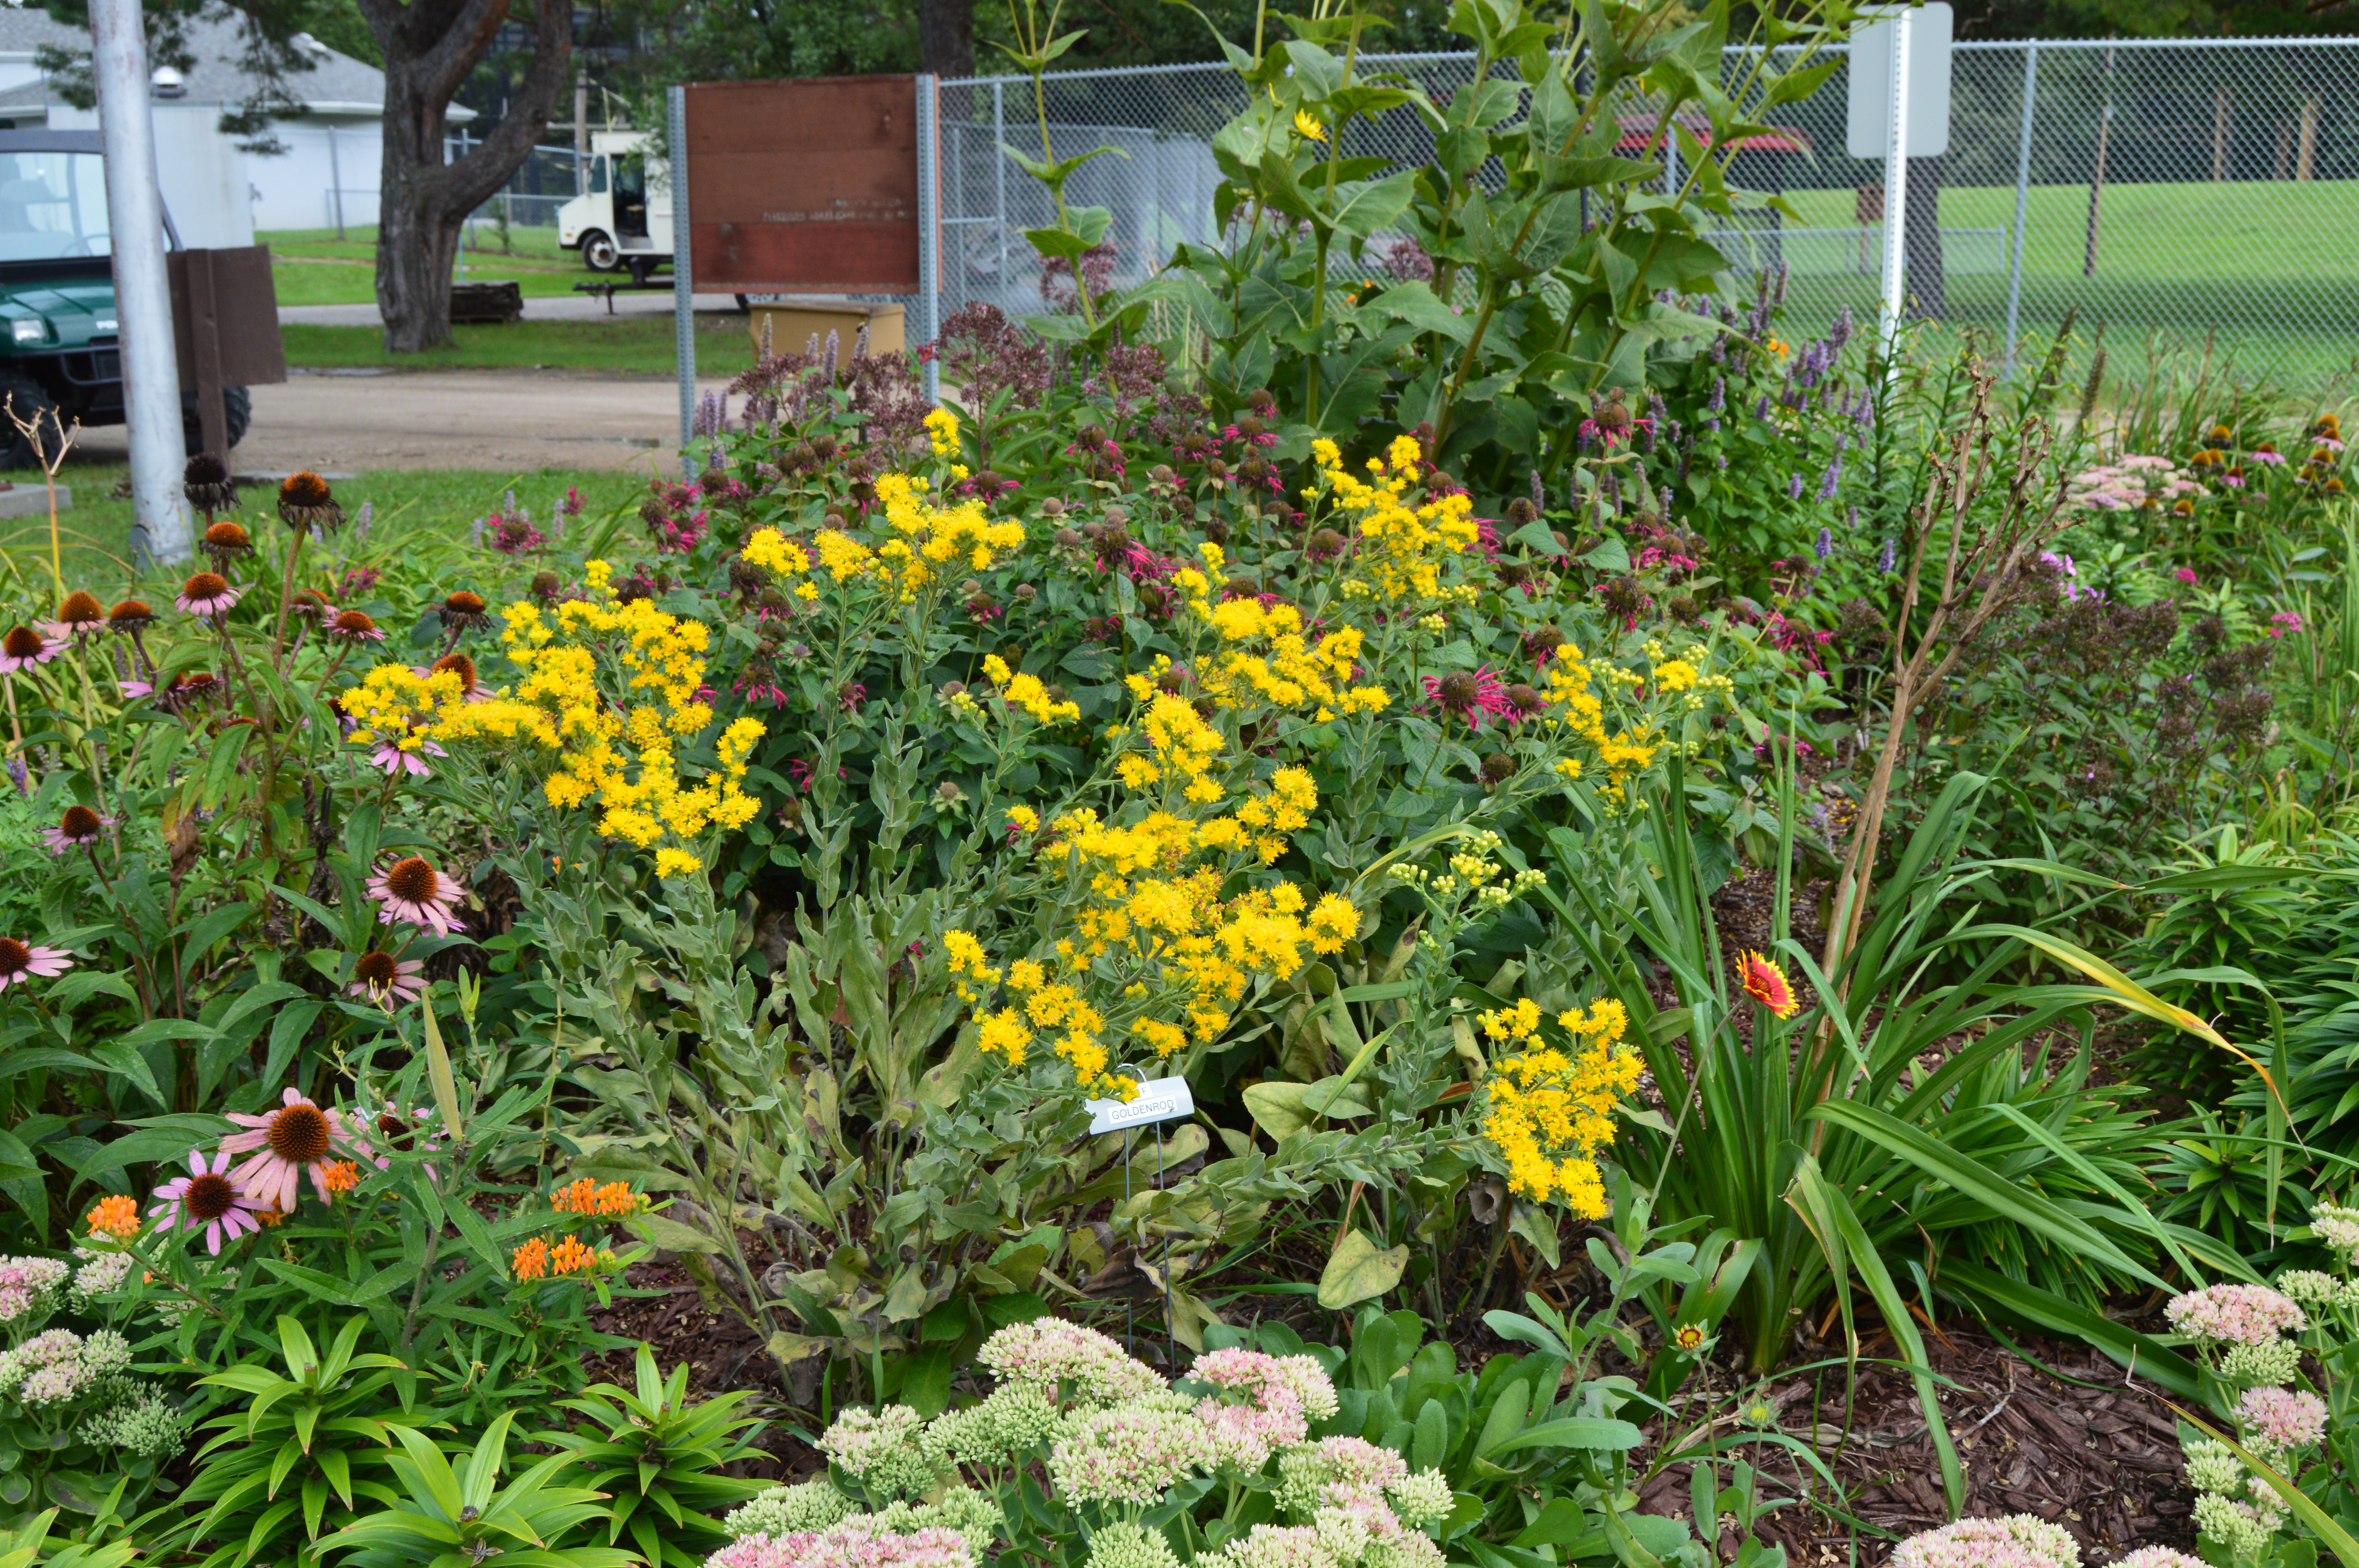 The NDSU Extension Master Gardener program funded pollinator gardens across North Dakota, such as the one at the Chahinkapa Park and Zoo in Wahpeton, N.D., to help save bees. (Photo courtesy of Master Gardener Joan Zettel)